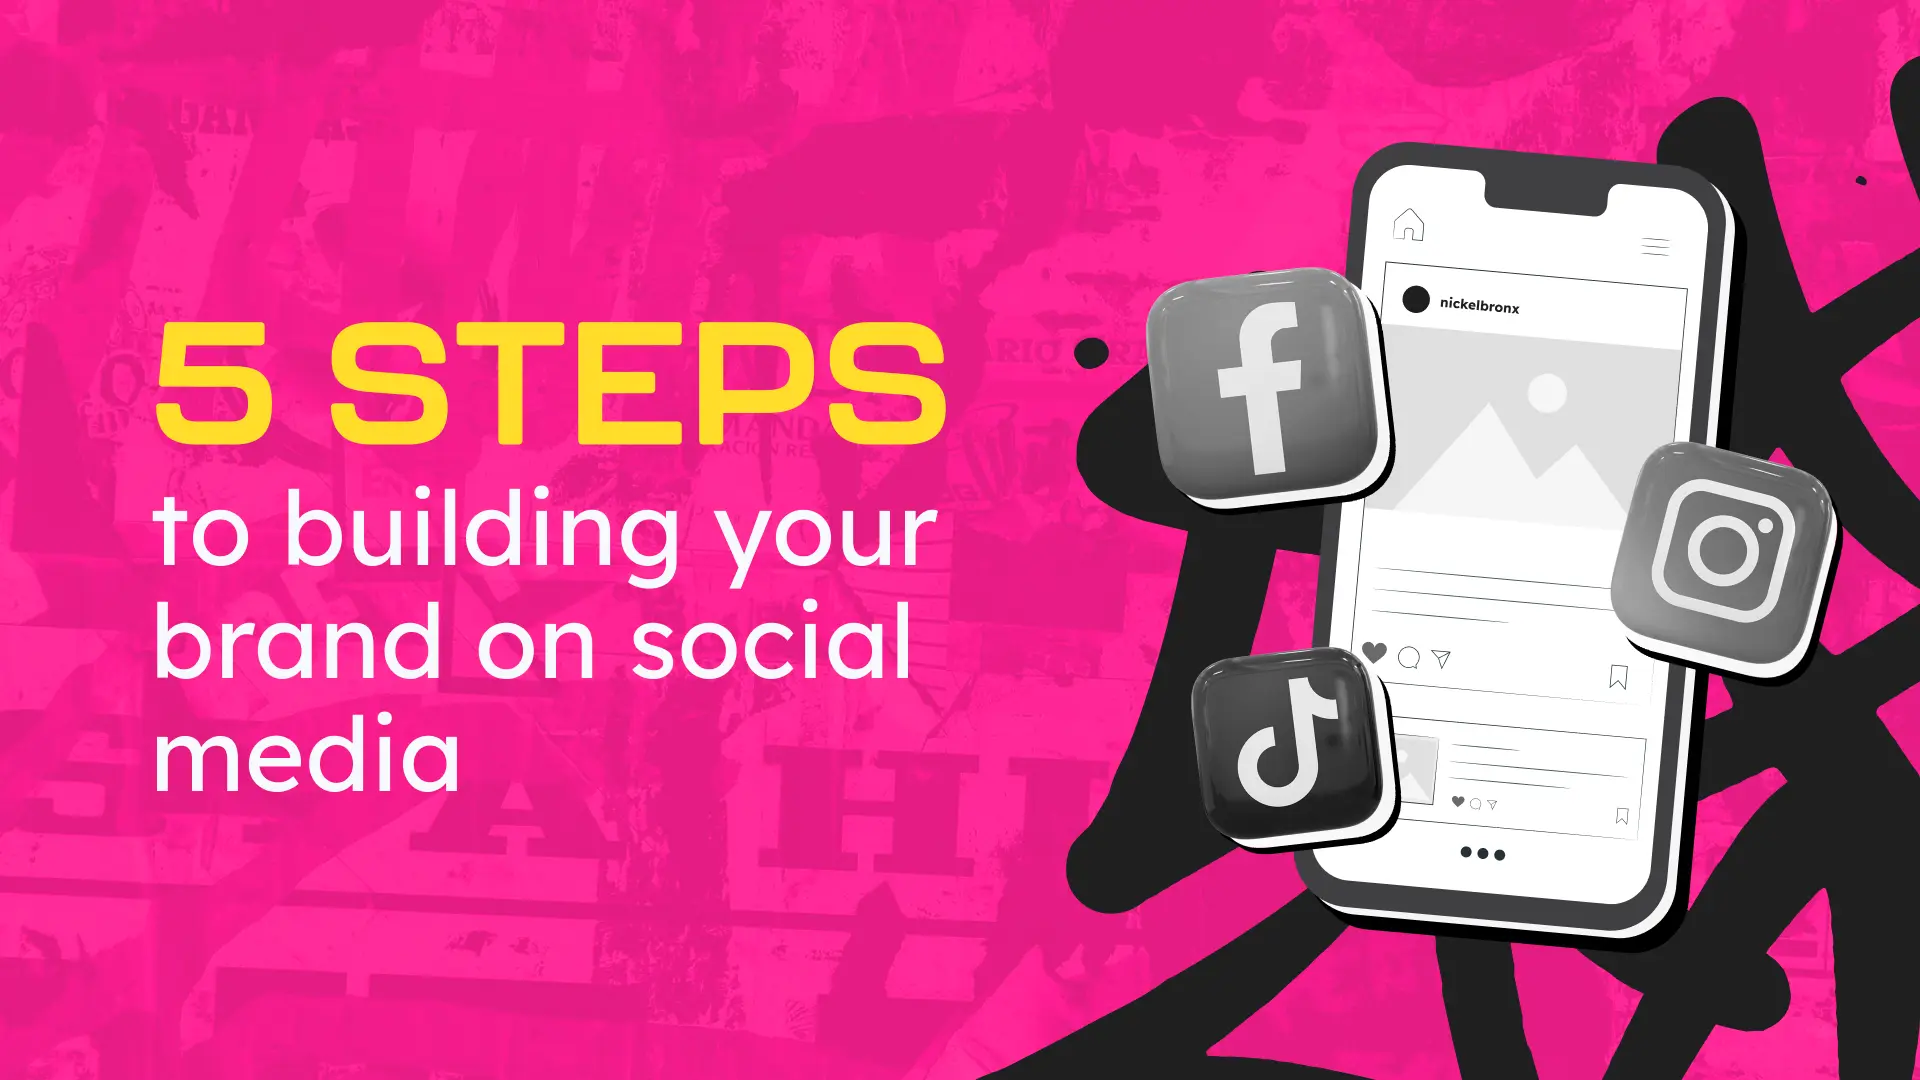 5 Steps to Building Your Brand on Social Media